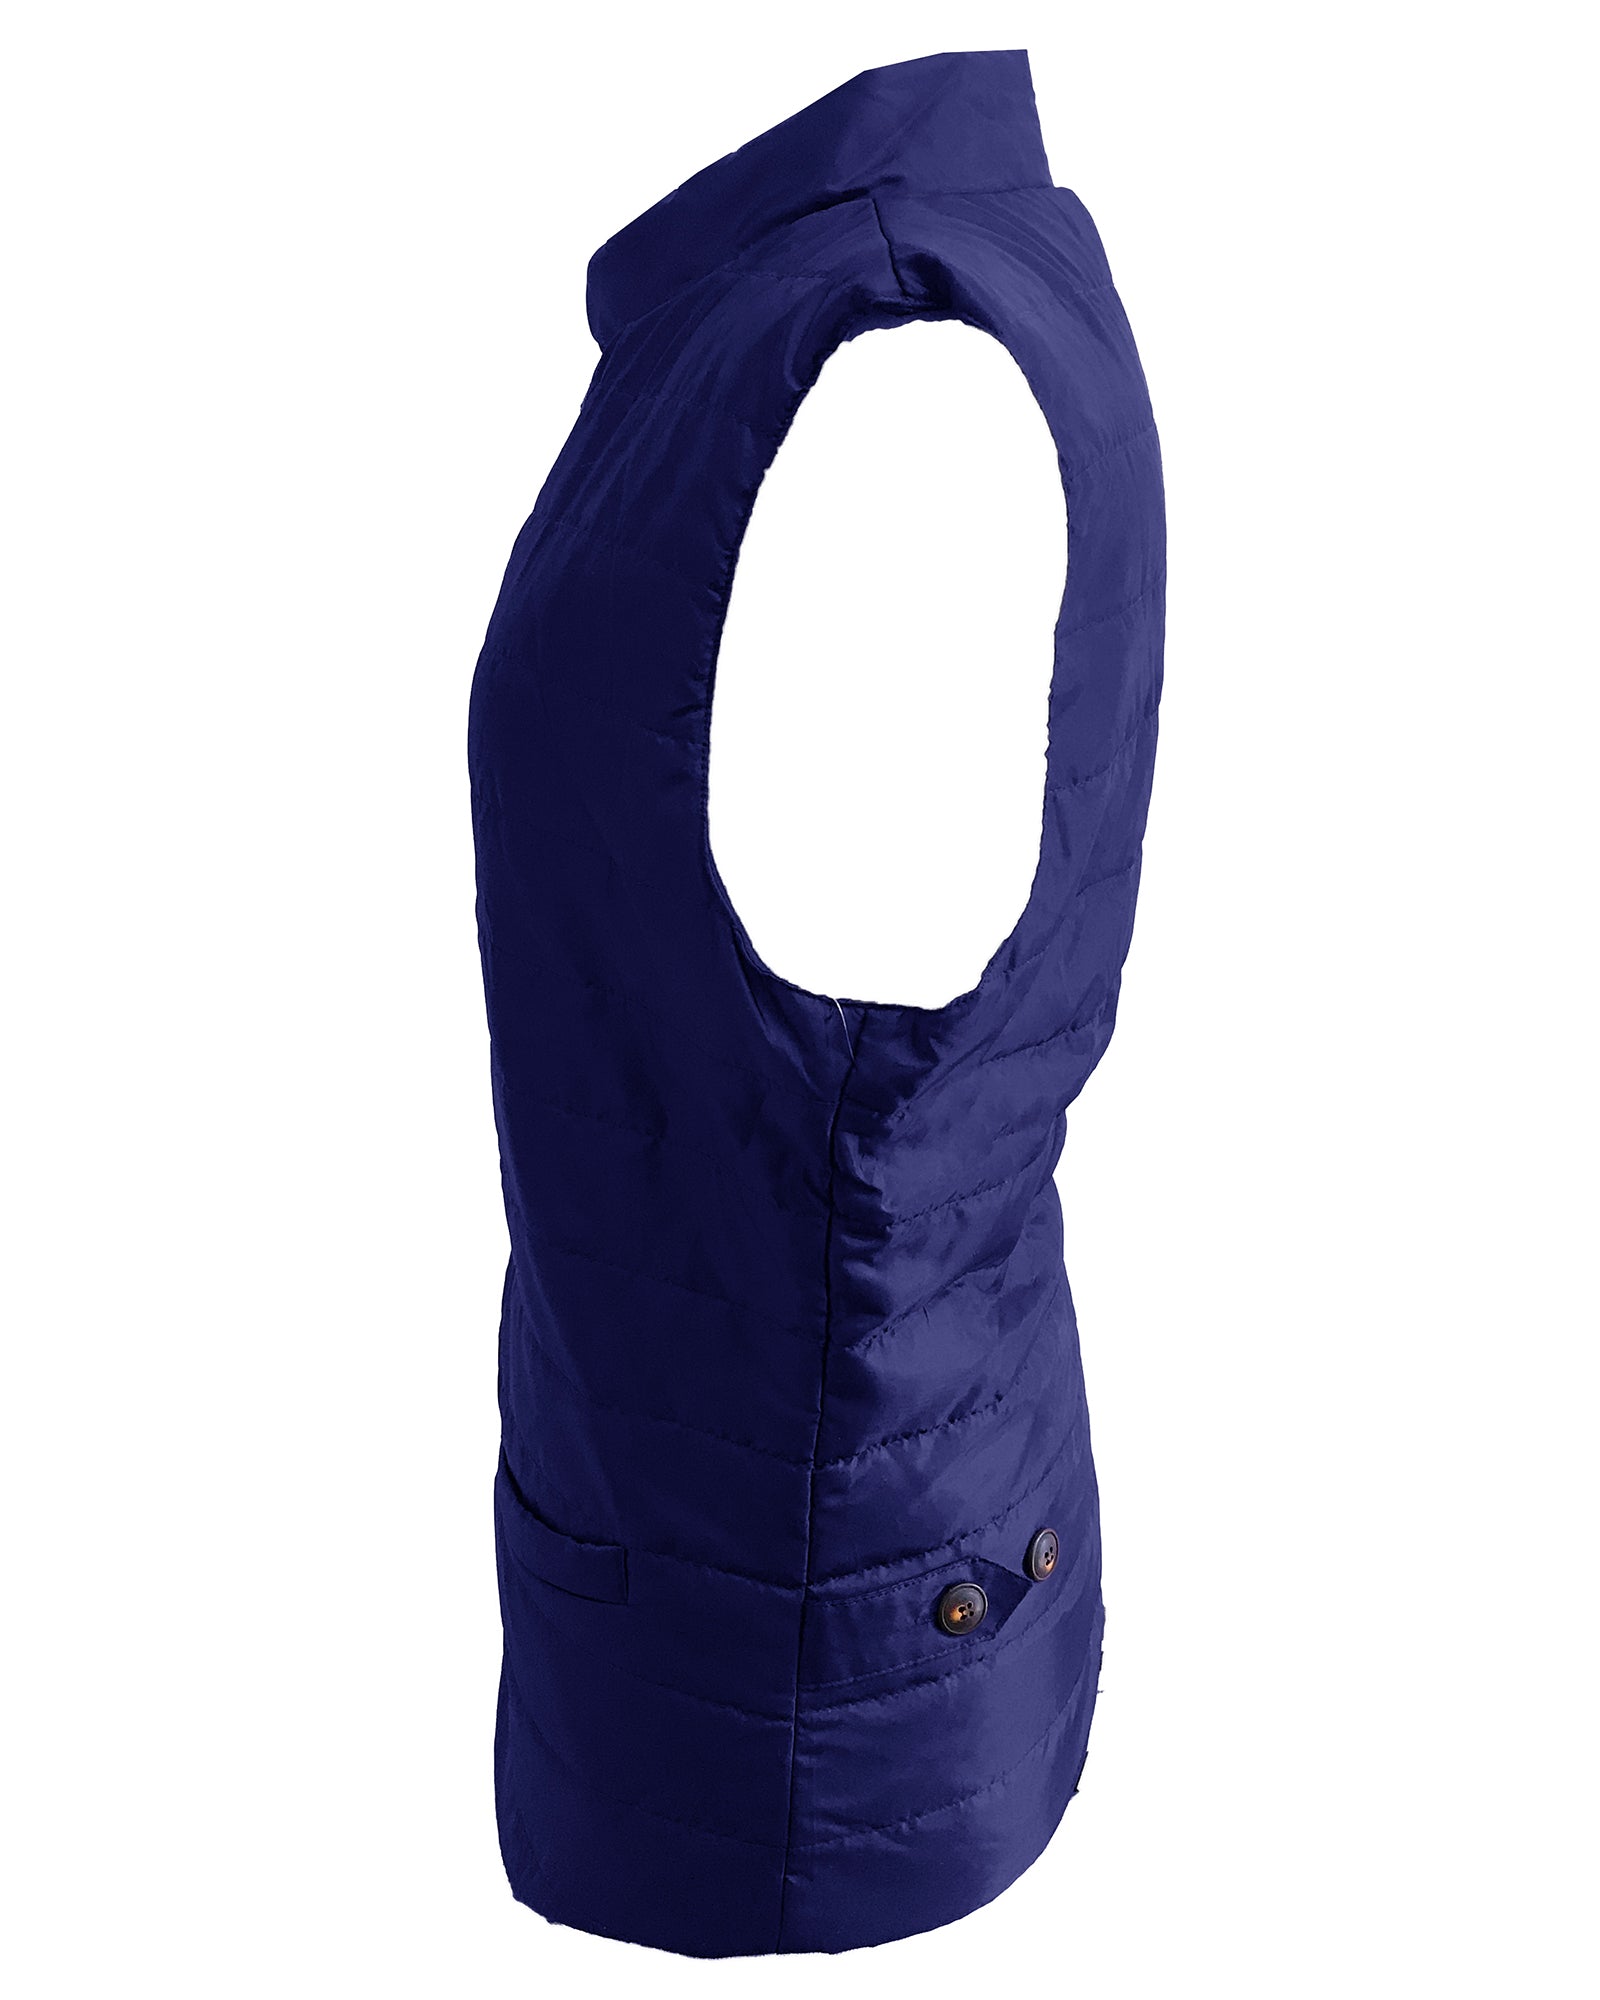 Quilted Multi-Pocket Water Resistant button Bodywarmer Gilet - Navy